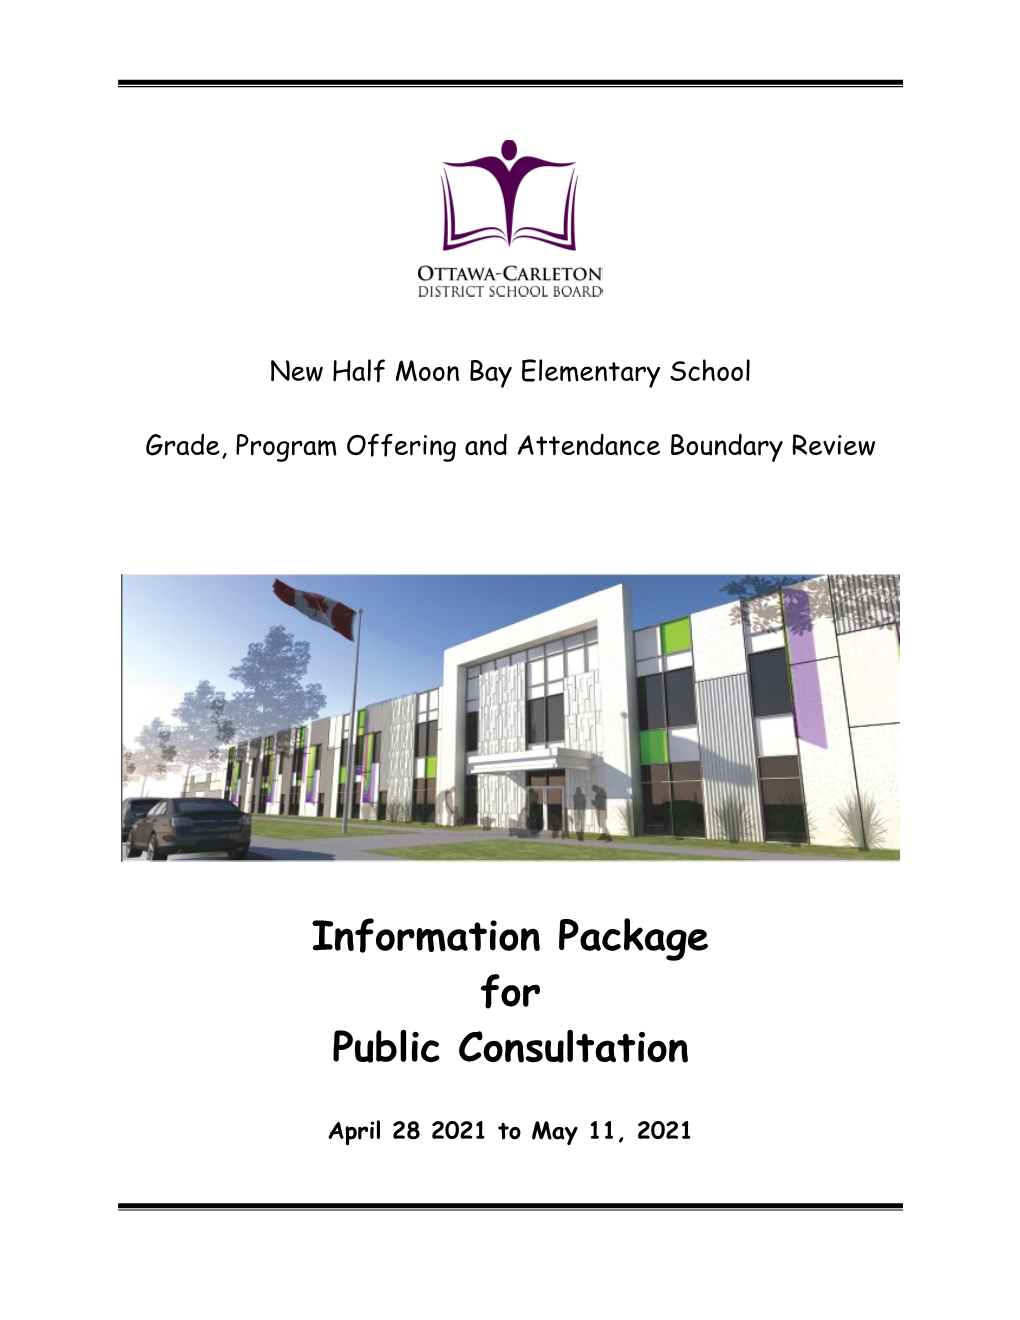 Information Package for Public Consultation